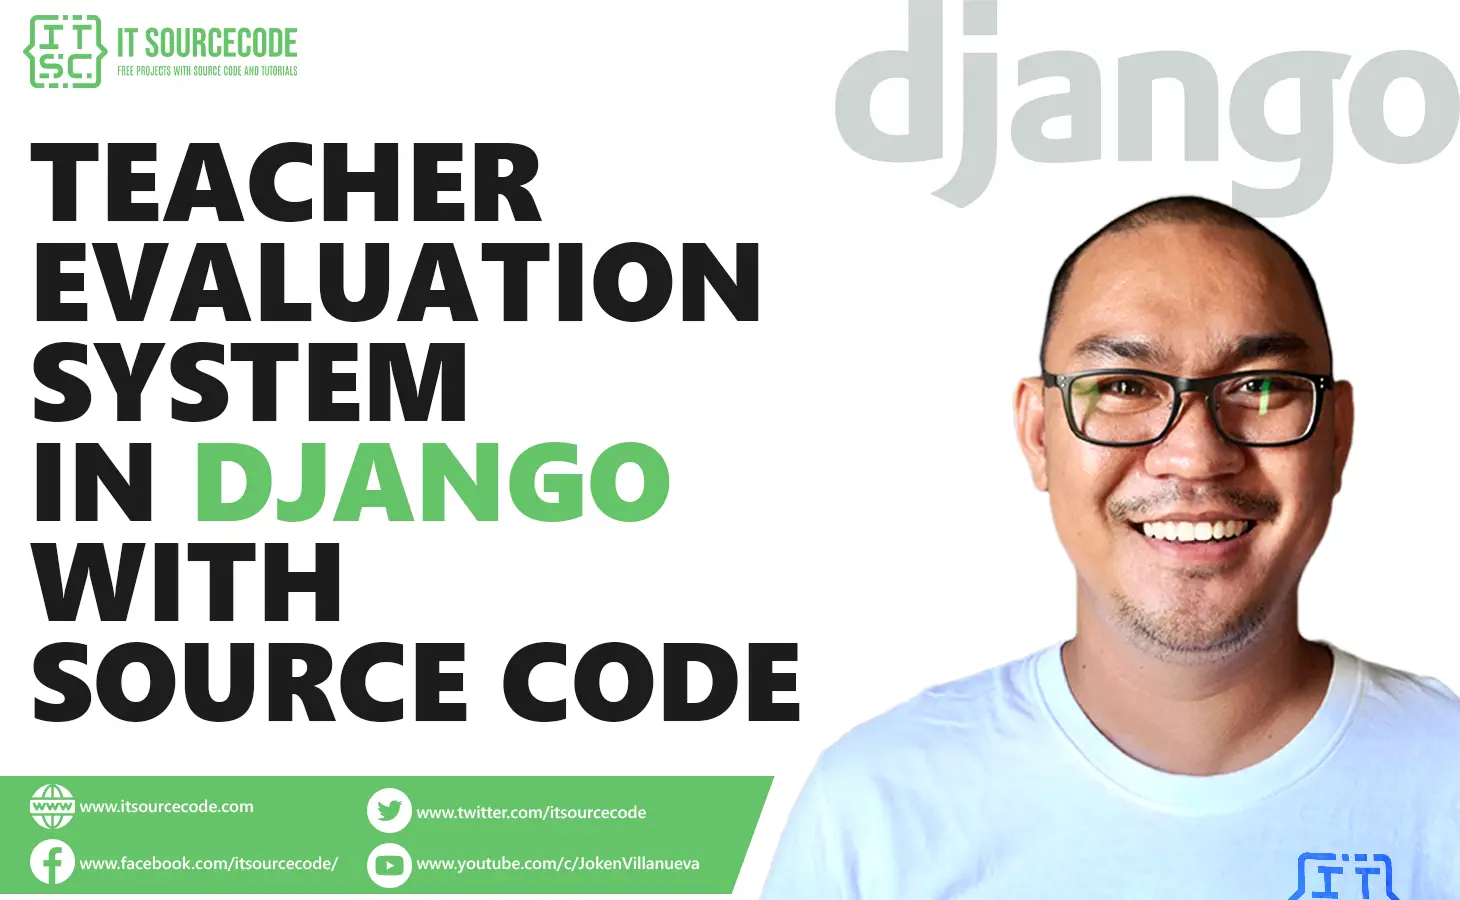 Teacher Evaluation System Project in Django with Source